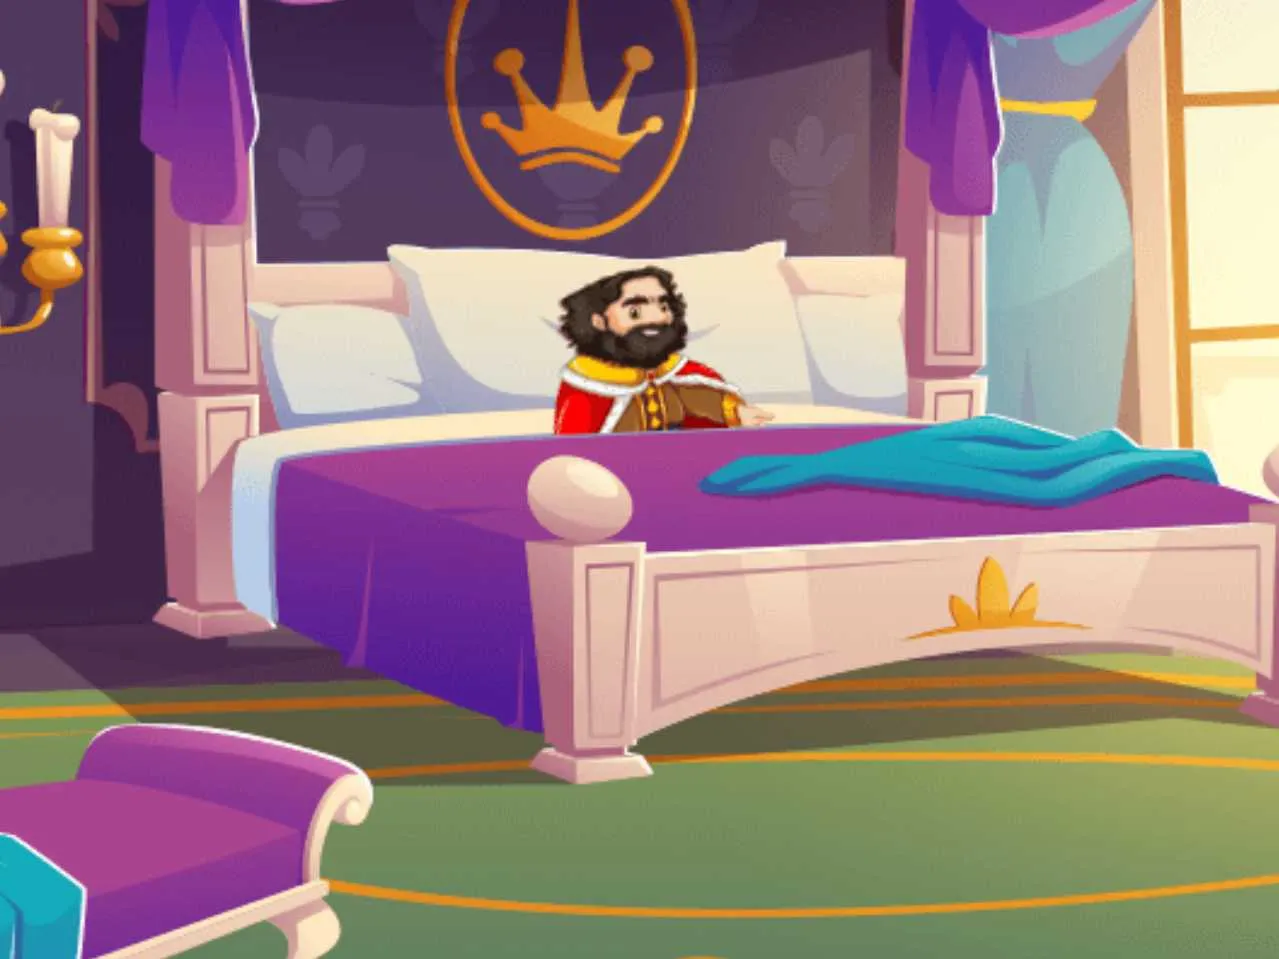 King lying on bed